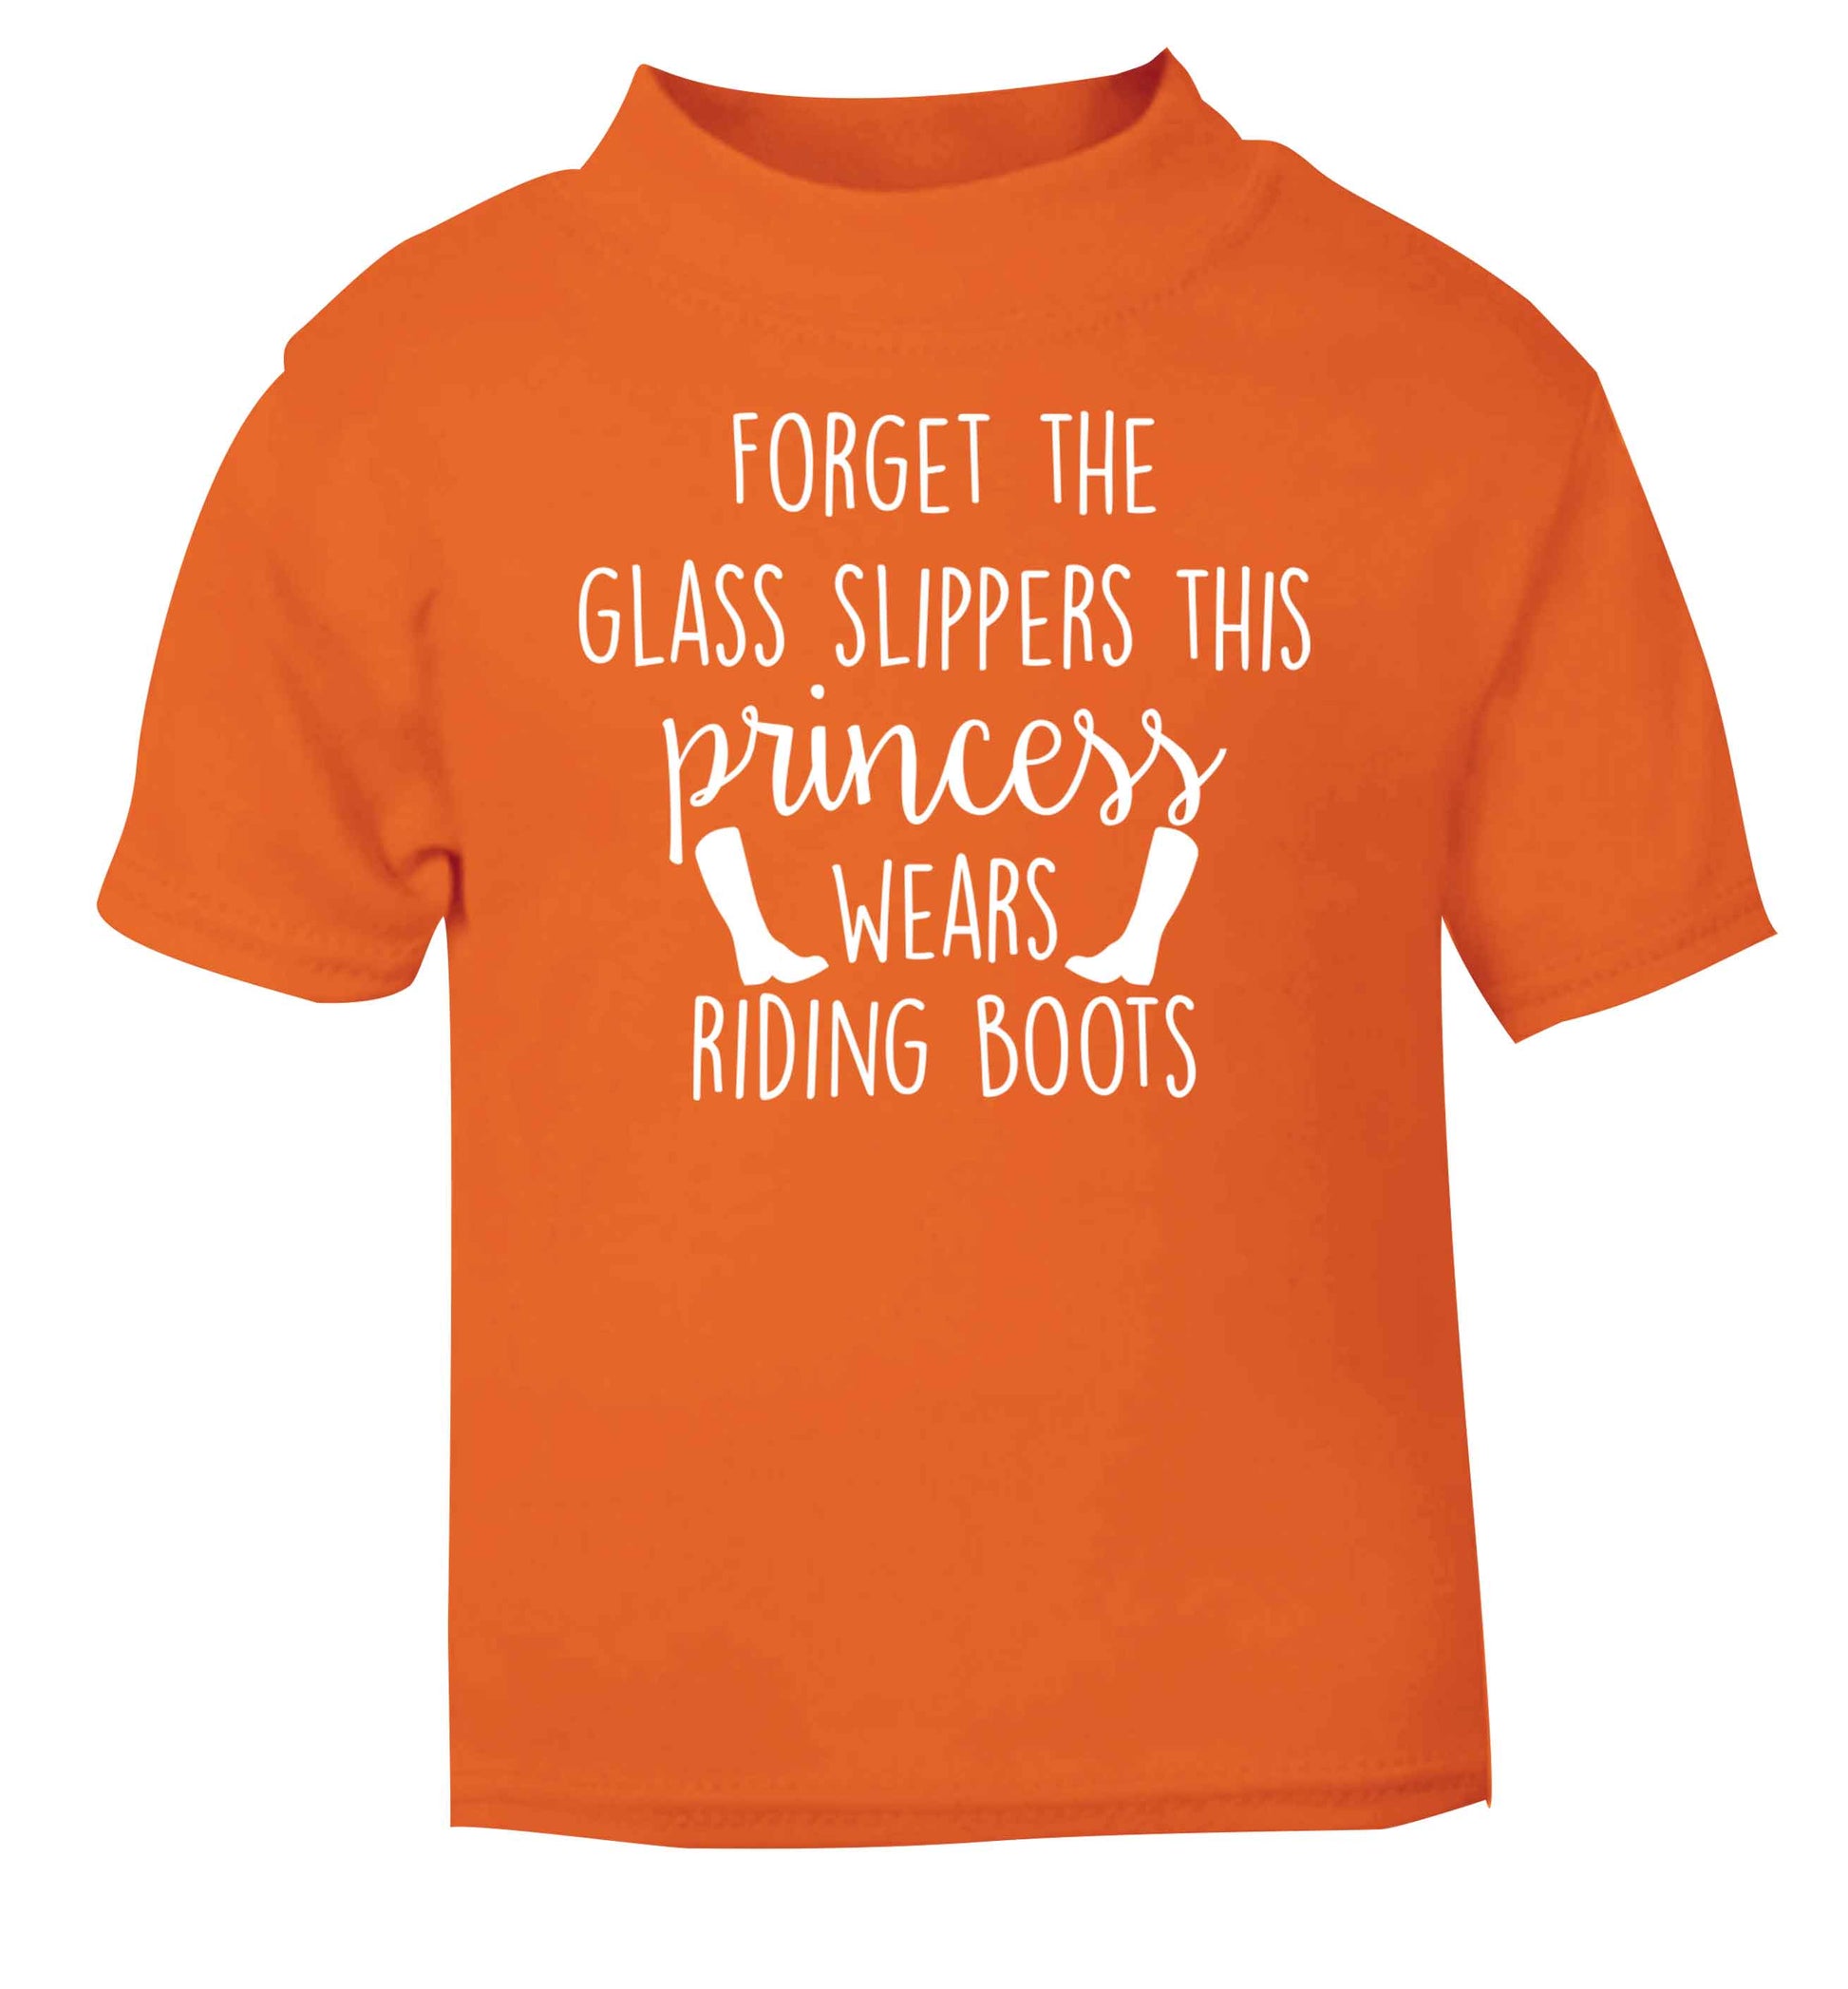 Forget the glass slippers this princess wears riding boots orange baby toddler Tshirt 2 Years